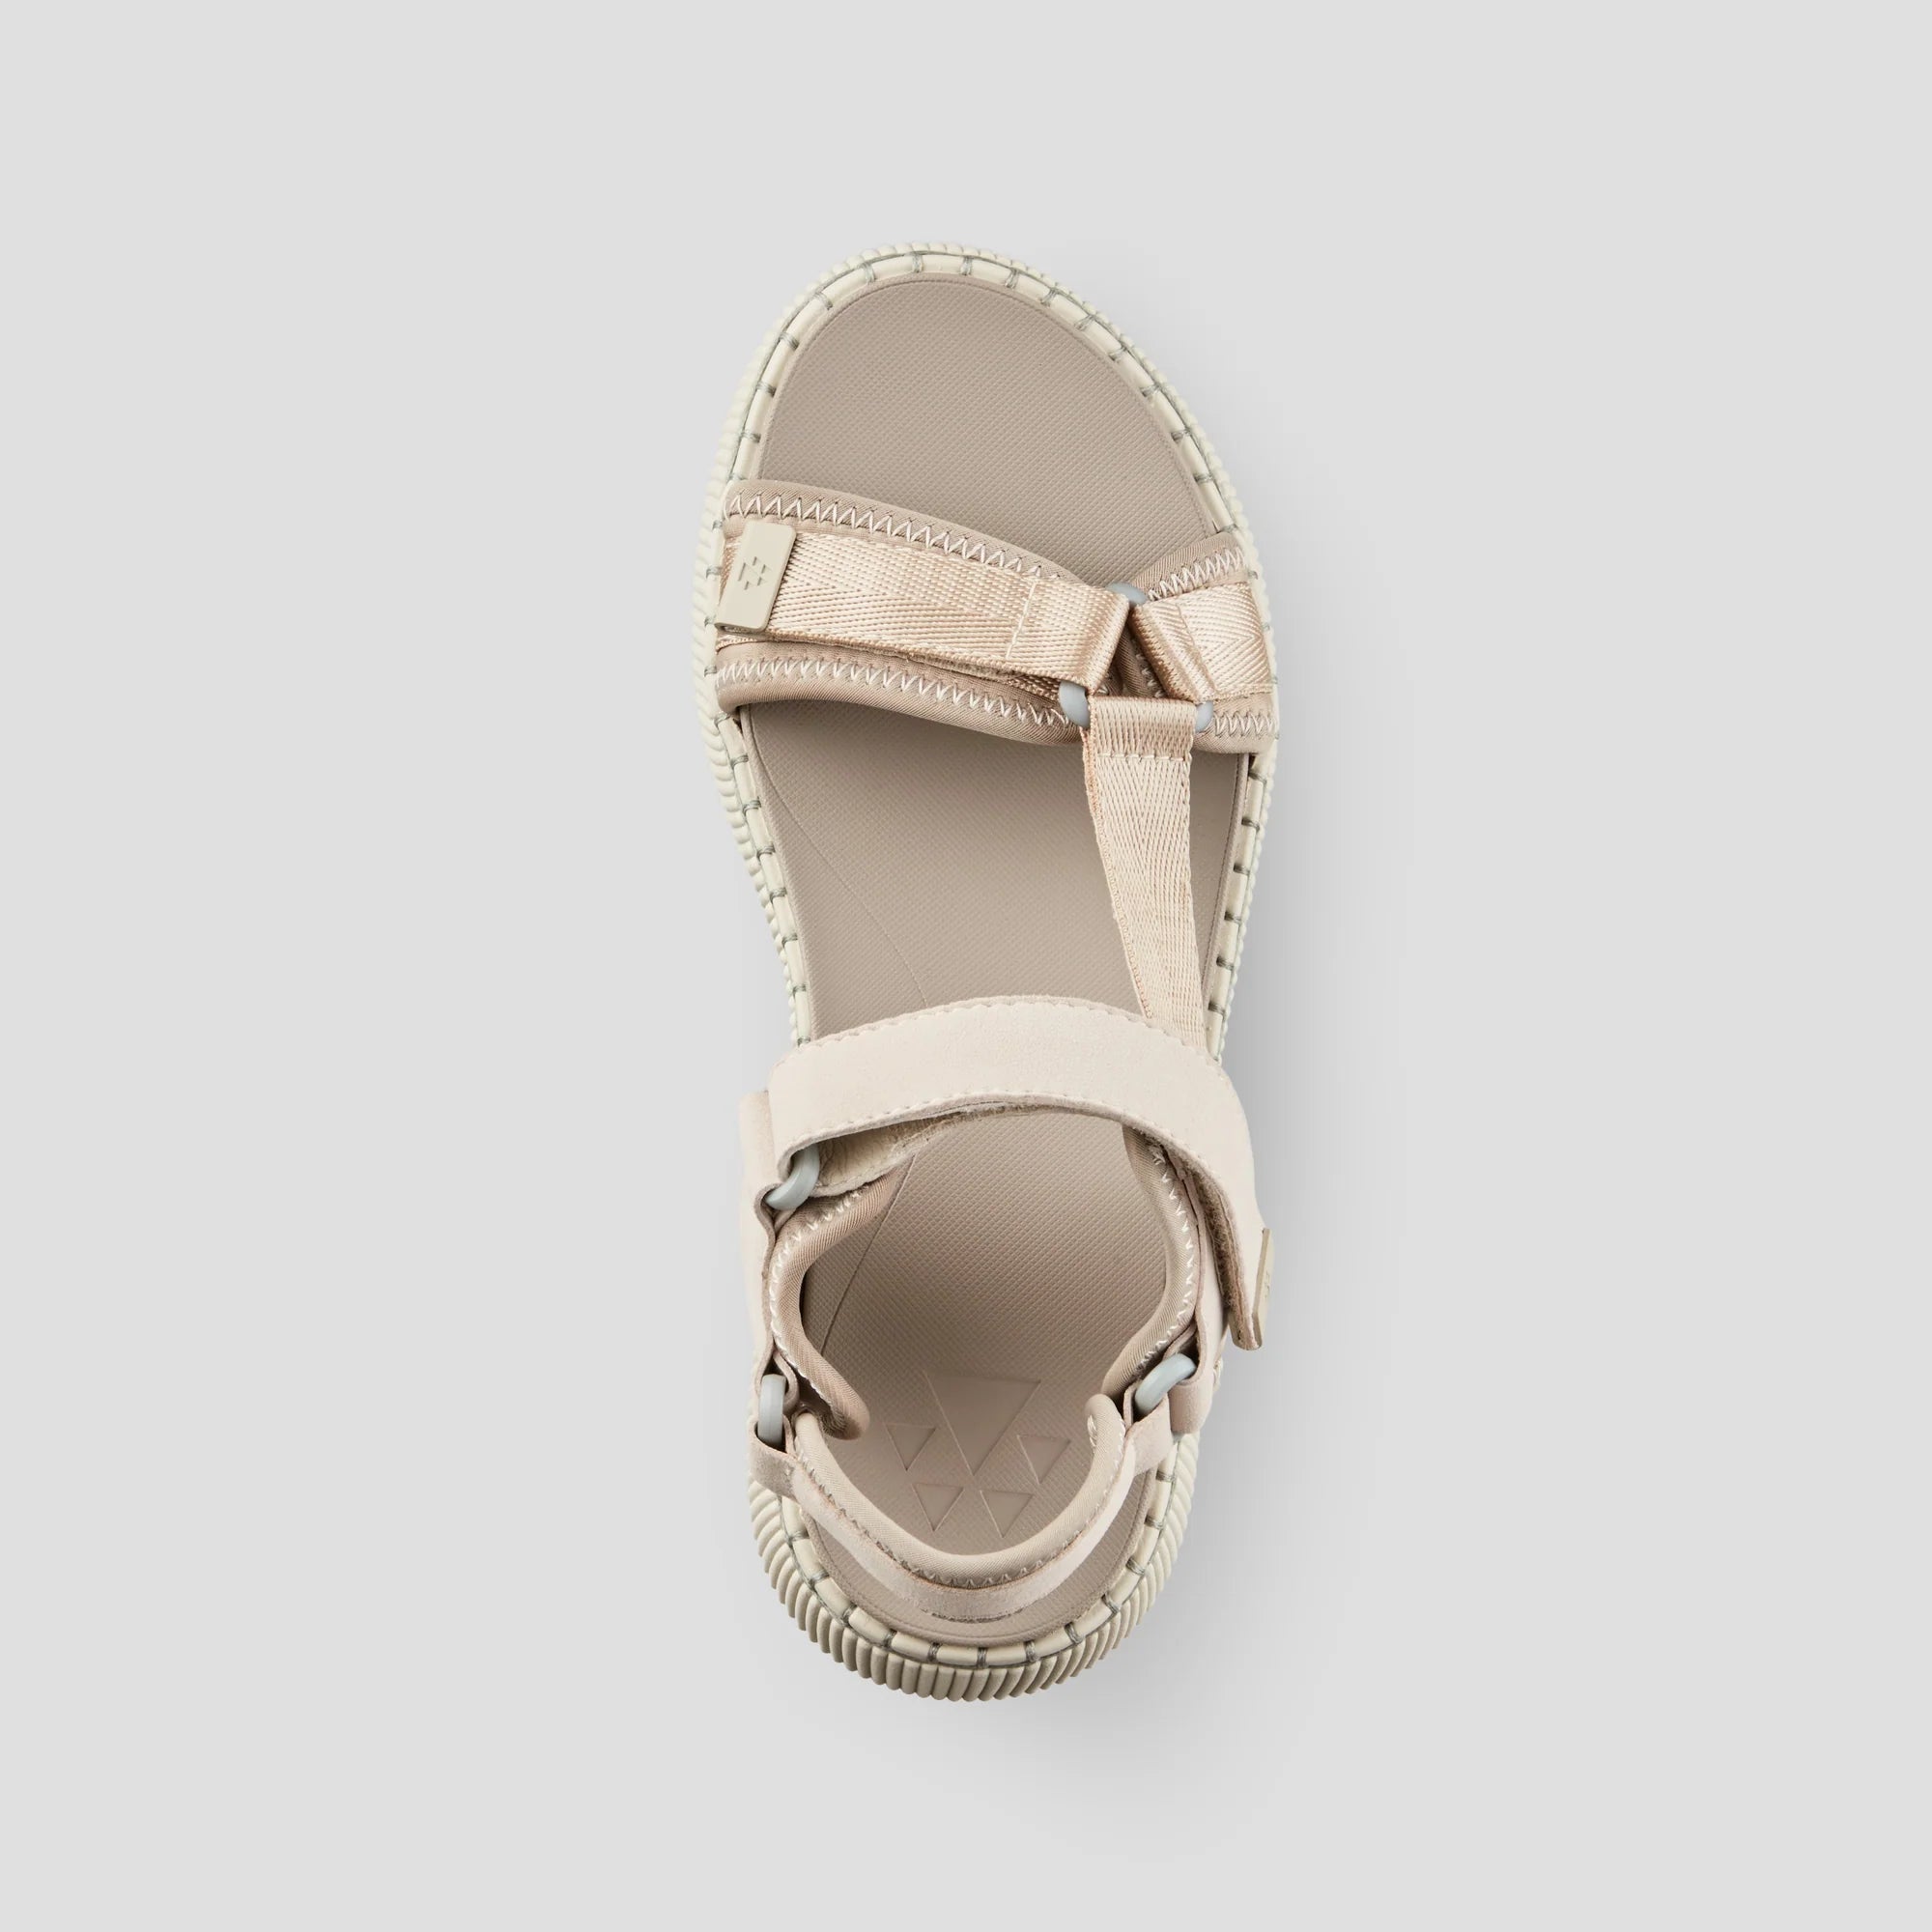 COUGAR SHOES SPRAY - Luxmotion Nylon and Suede Water-Friendly Sandal - Boutique Bubbles